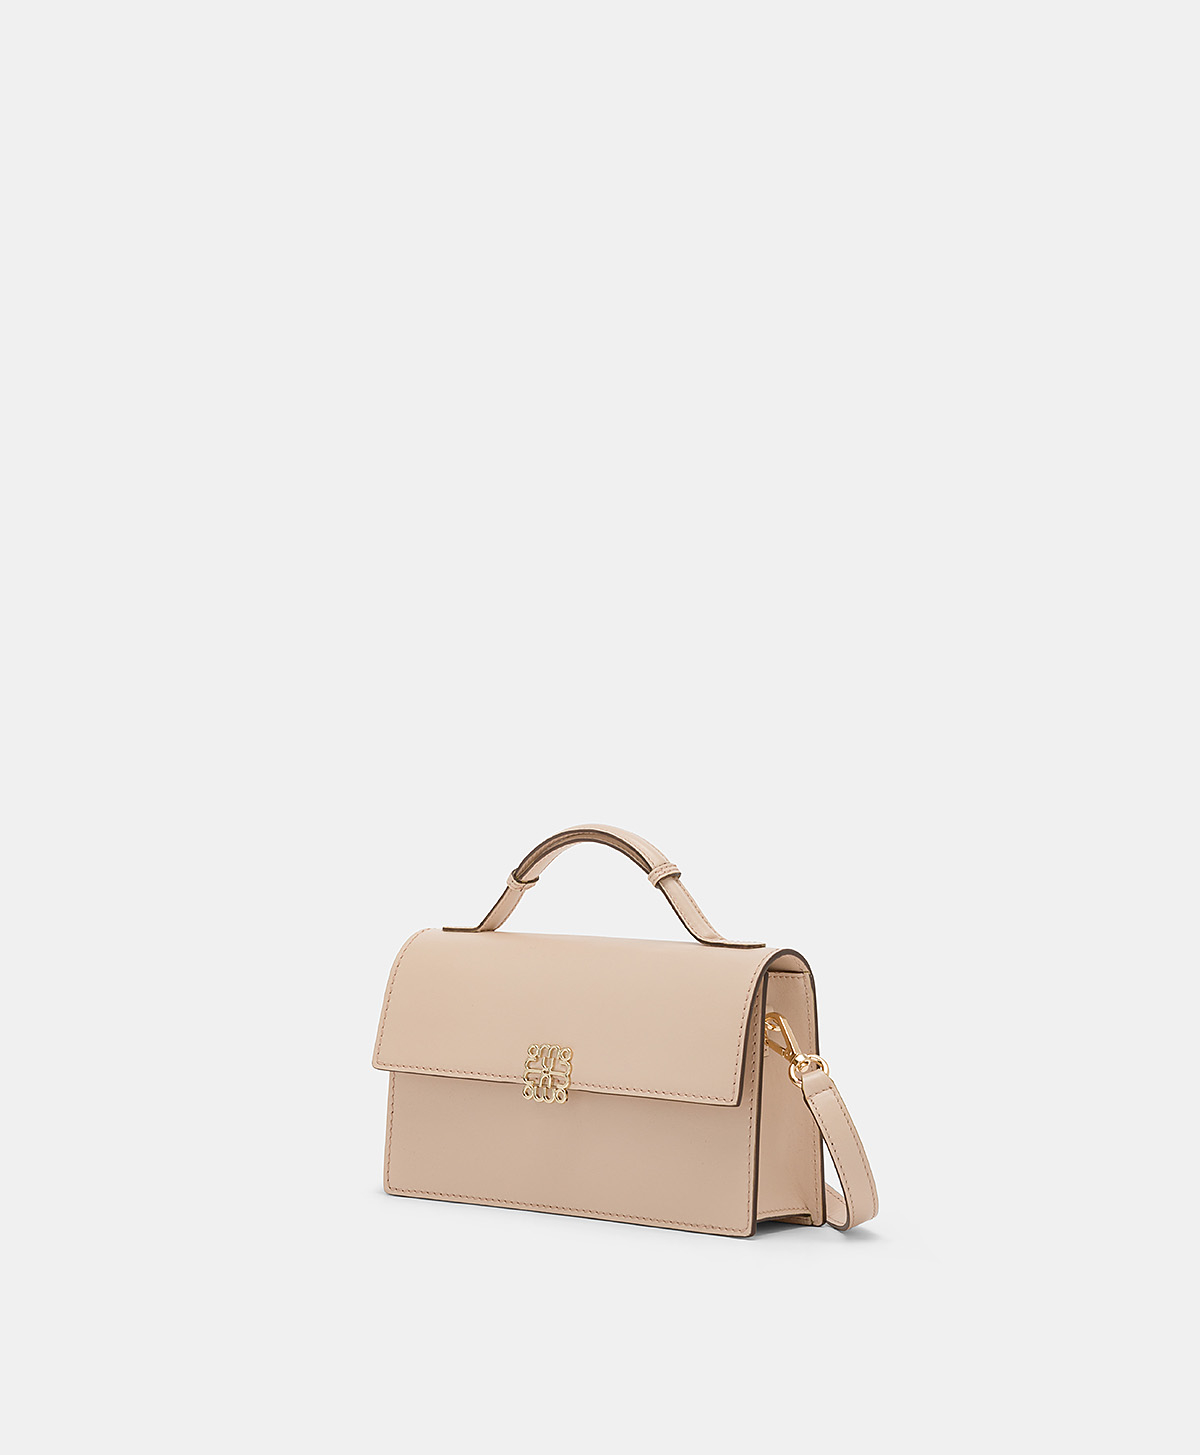 SOPHIE BAG IN NAPPA LEATHER - POWDER PINK - Momonì